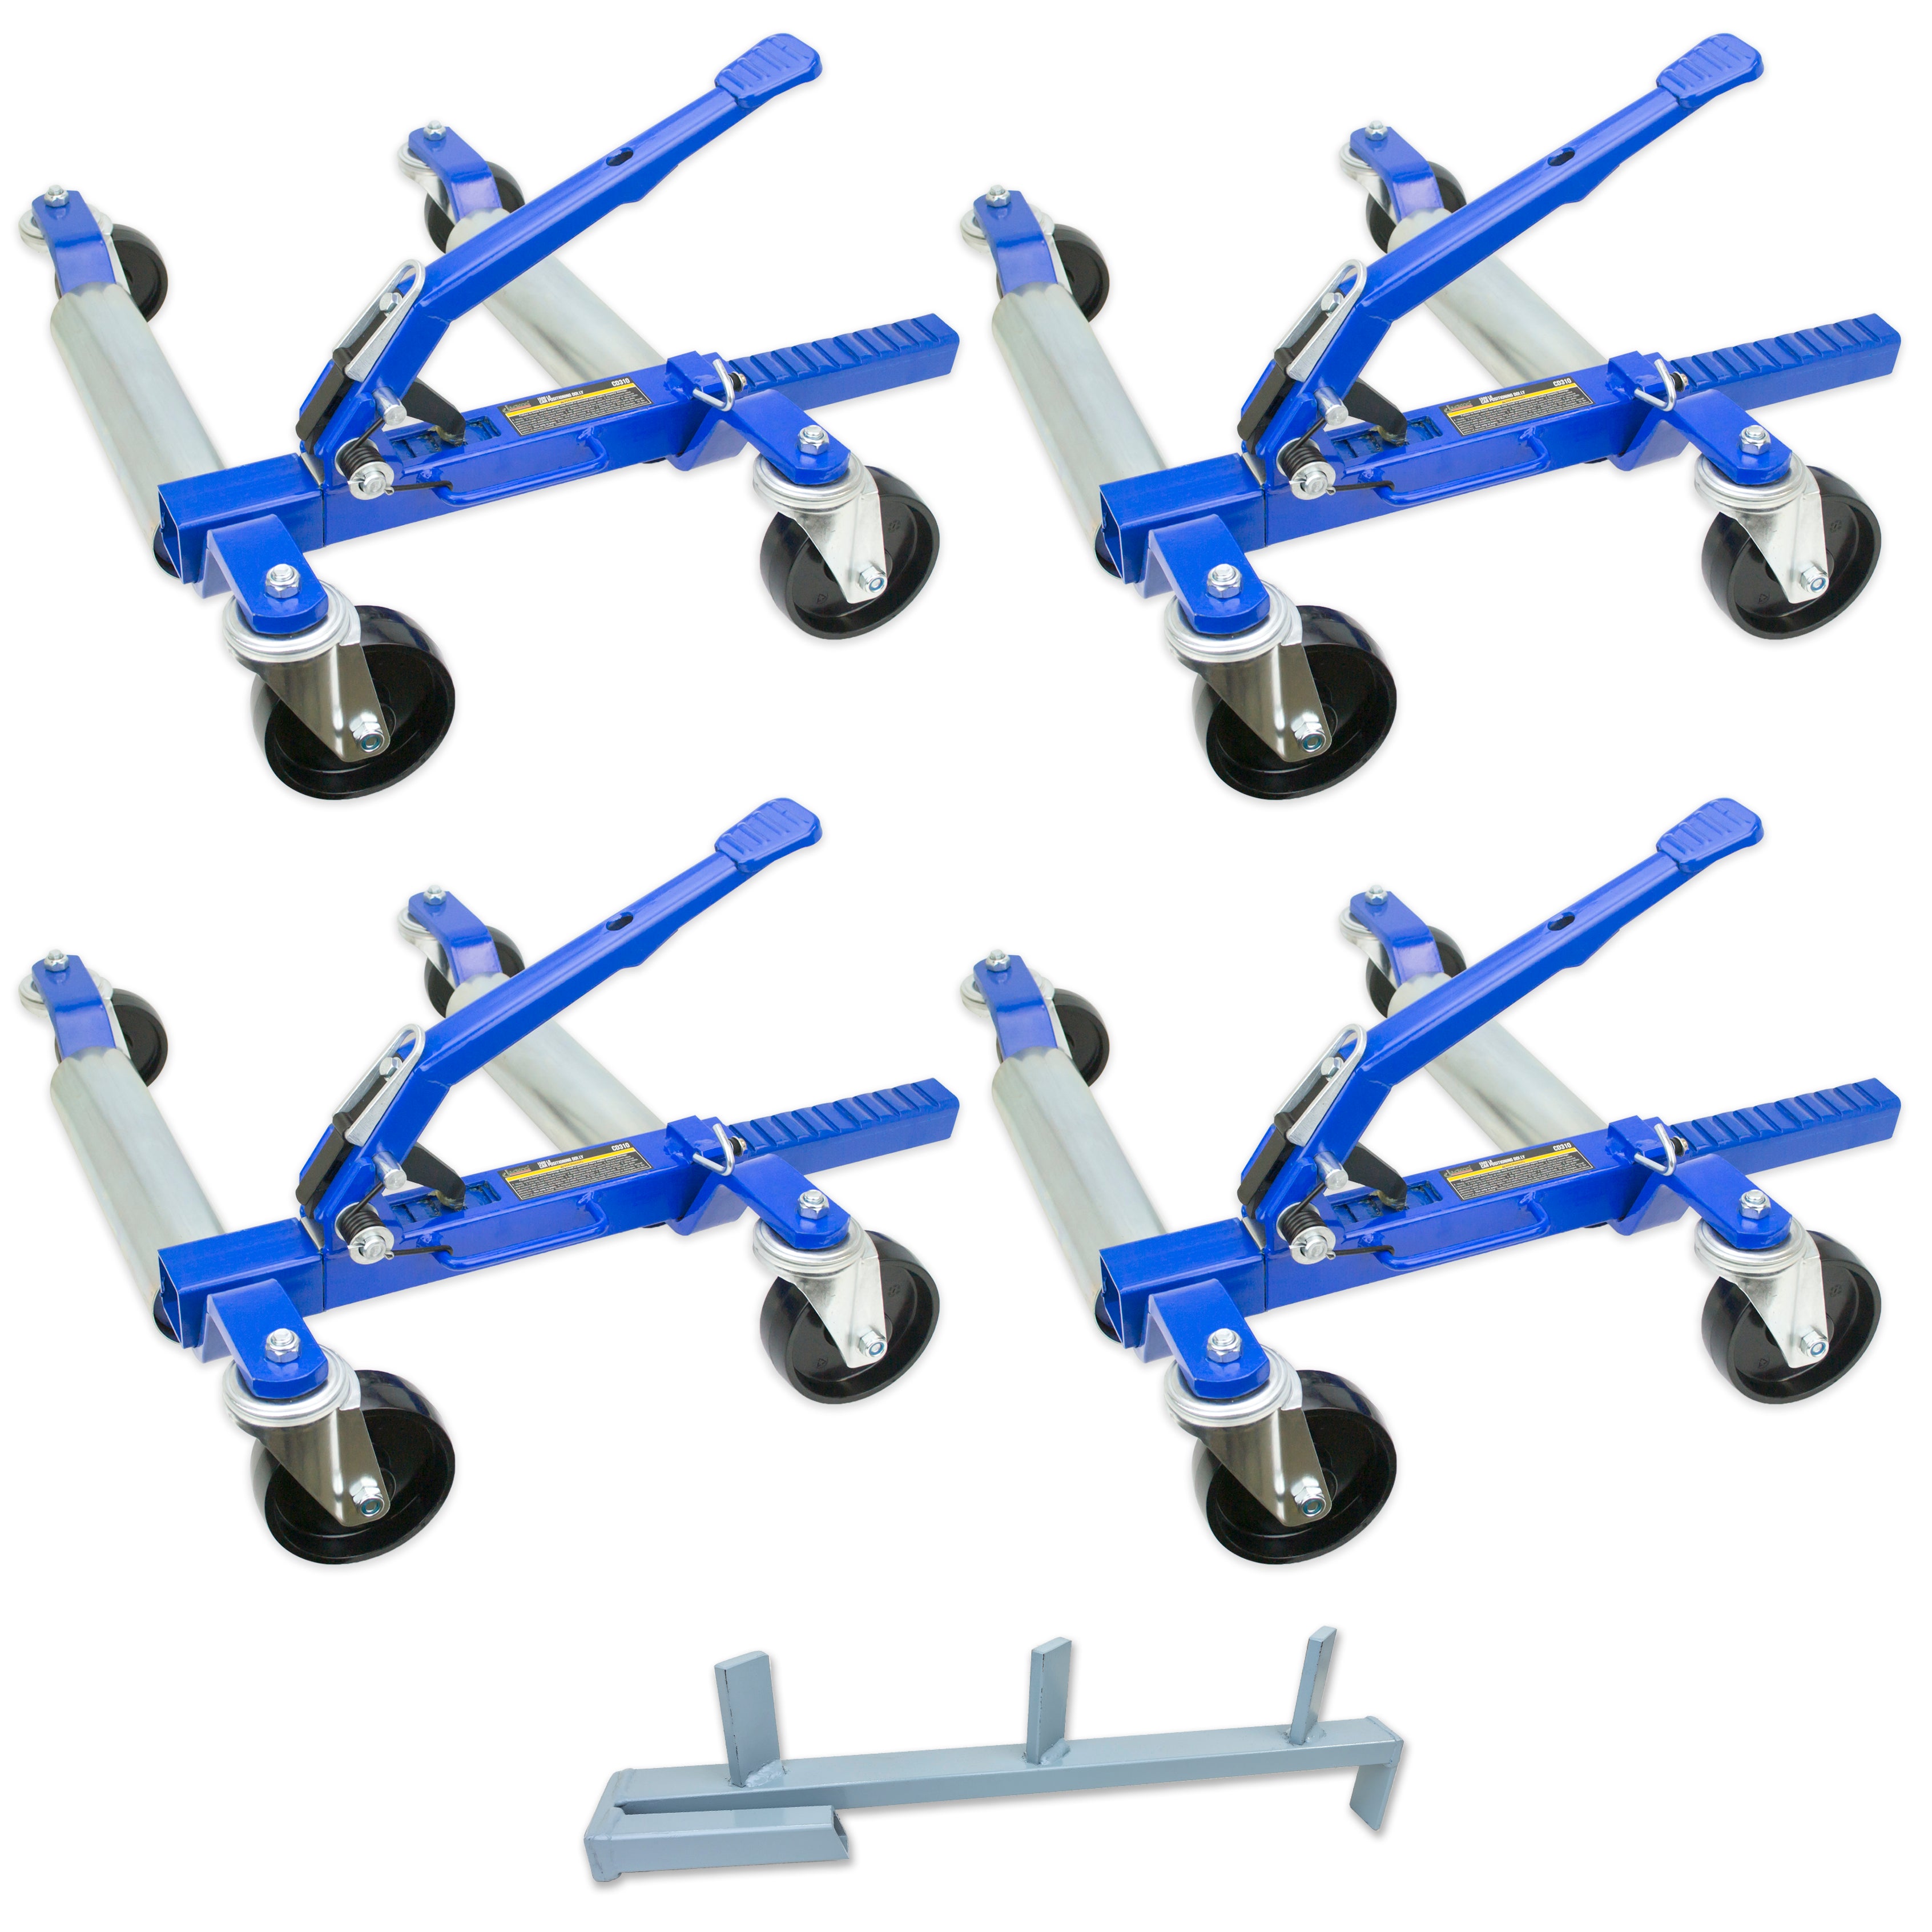 Jackco 1500 LB 12.5” Wheel Car Positioning Dolly (4 Pack with Stand) - Tool Guy Republic